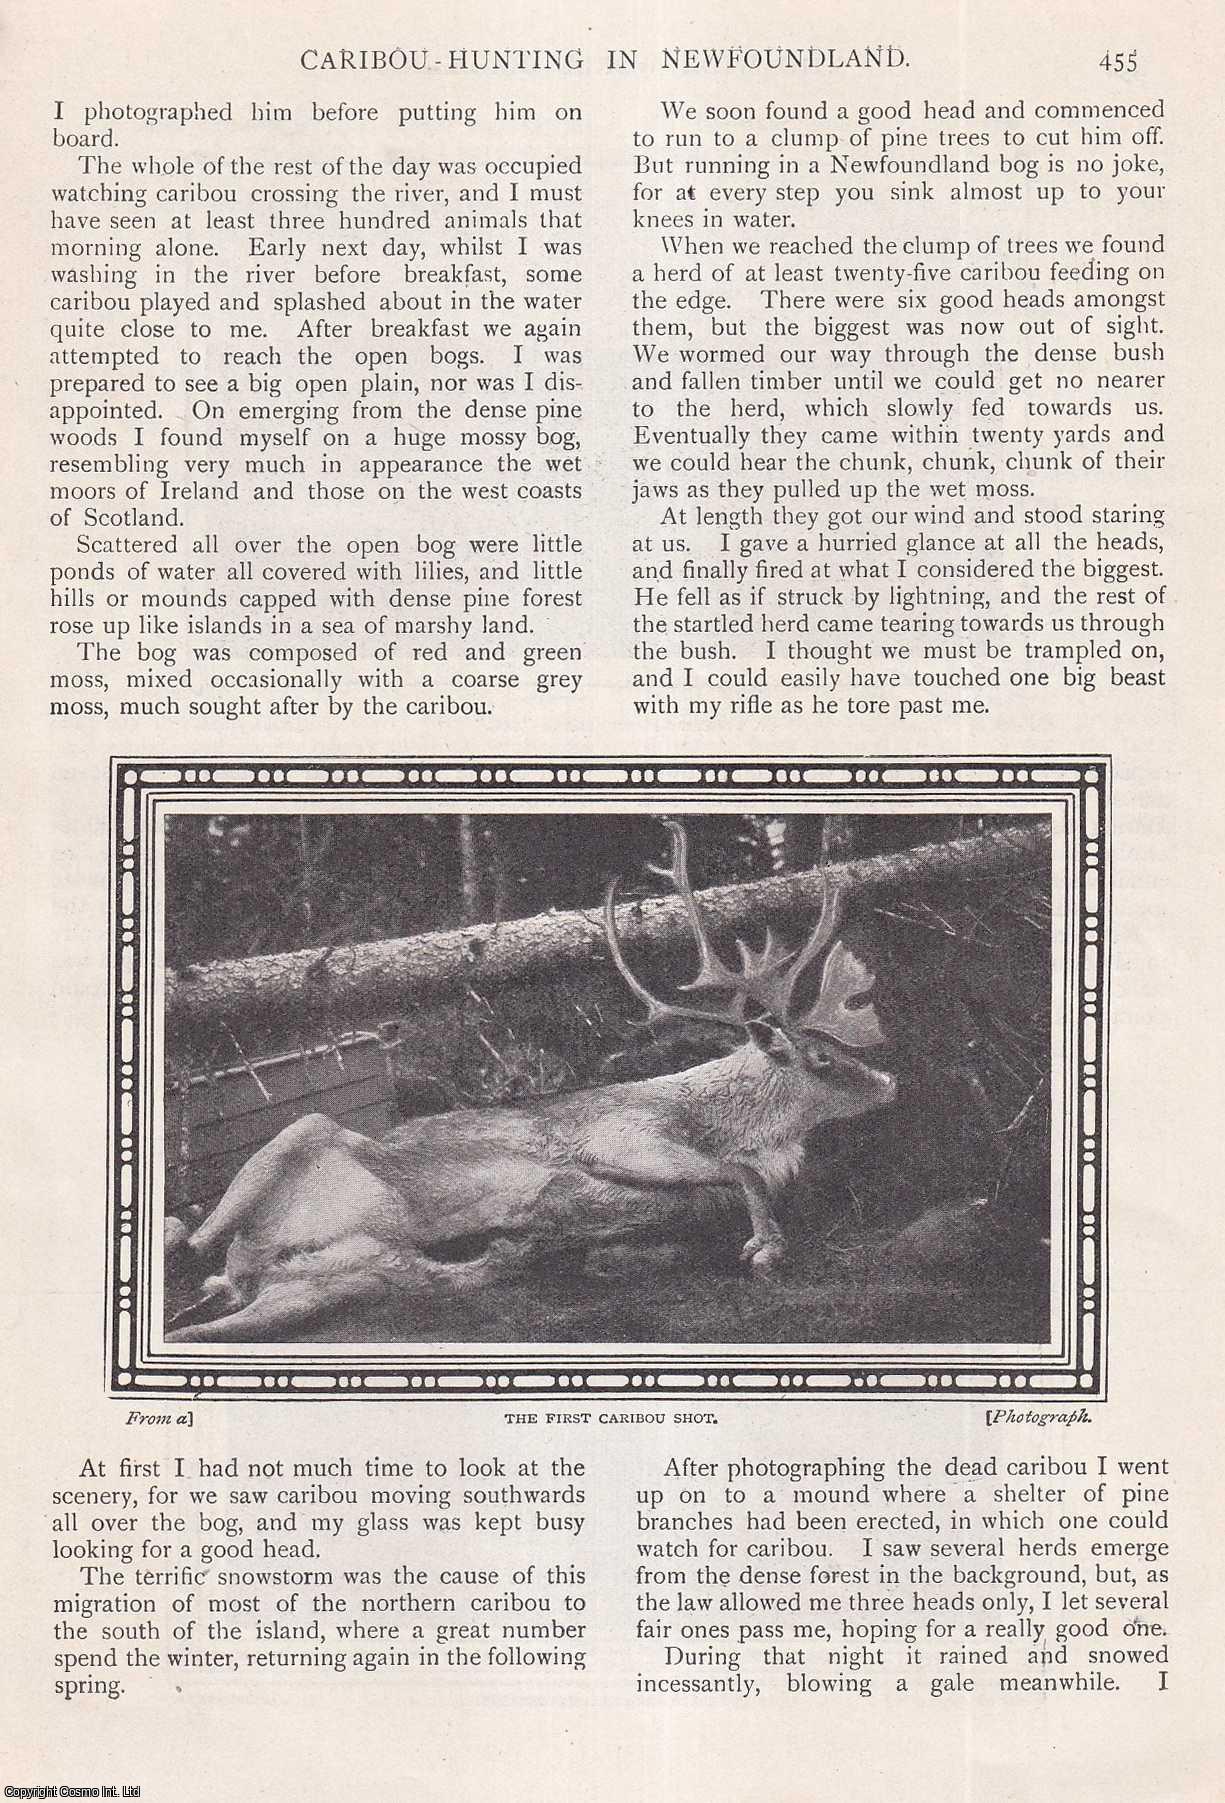 CANADIAN HUNTING - Caribou-Hunting in Newfoundland. By C.V.A. Peel. An uncommon original article from the Wide World Magazine, 1908.